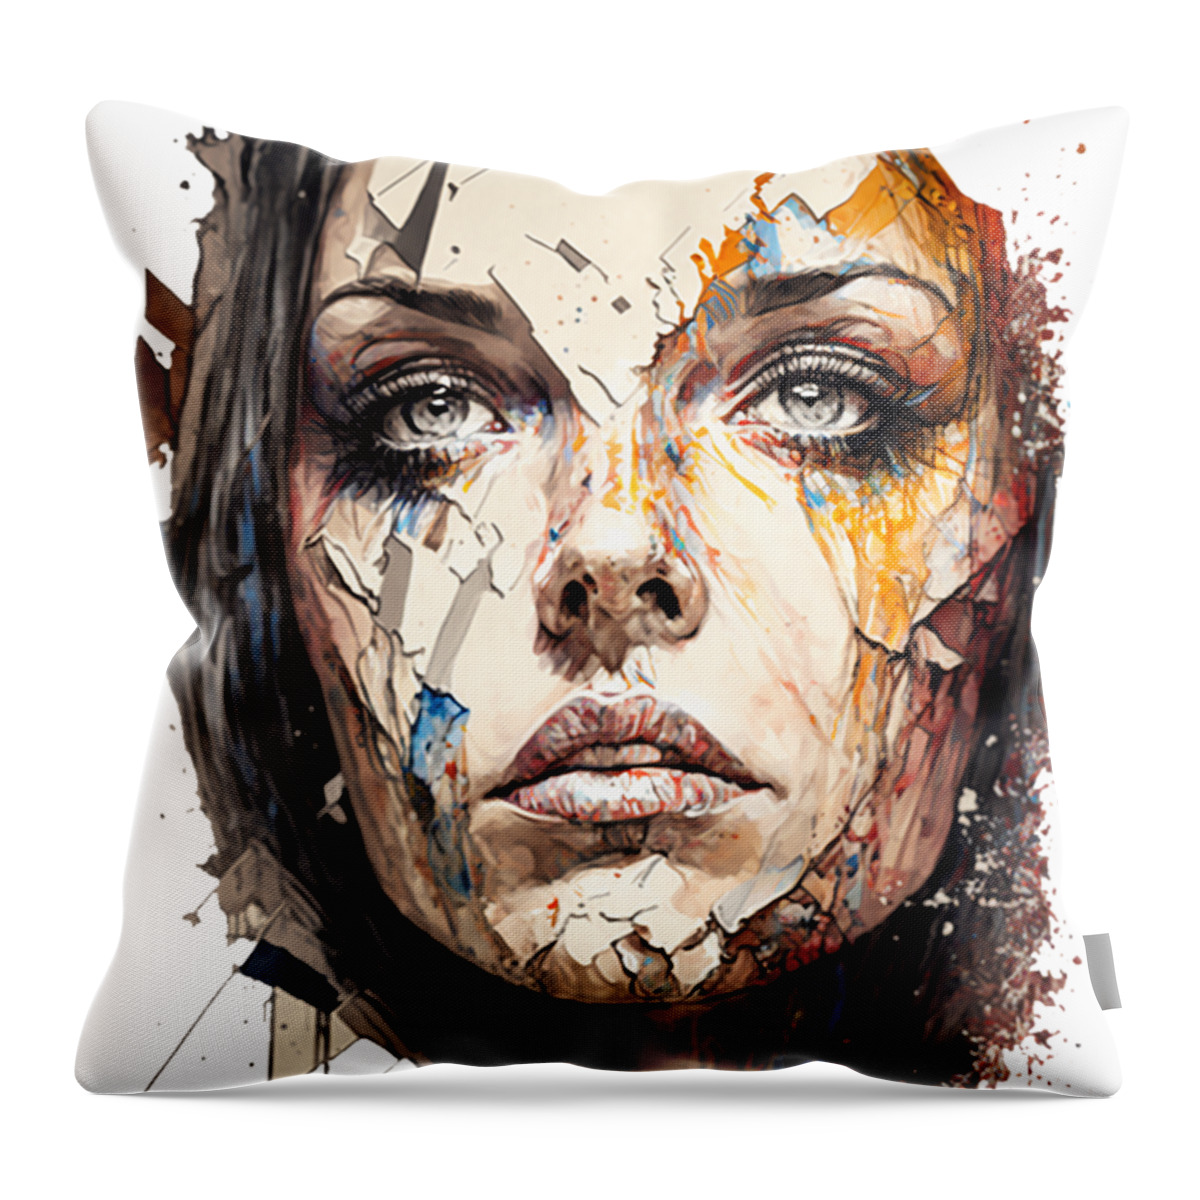 Series Throw Pillow featuring the digital art No future by Sabantha